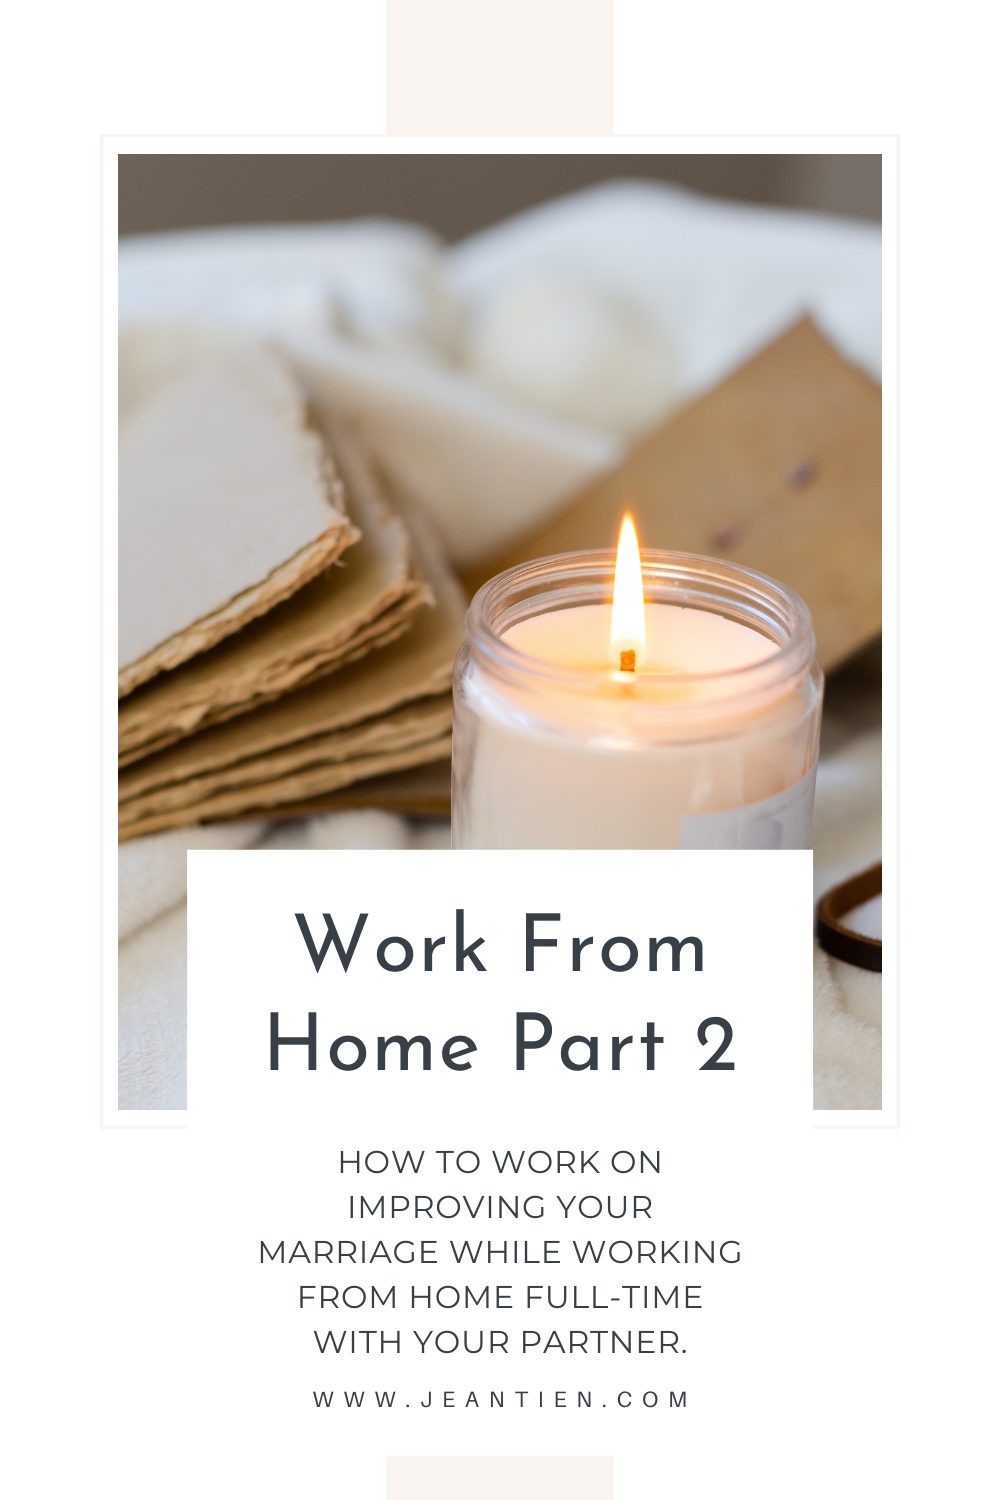 Work from Home Part 2 Blog Post